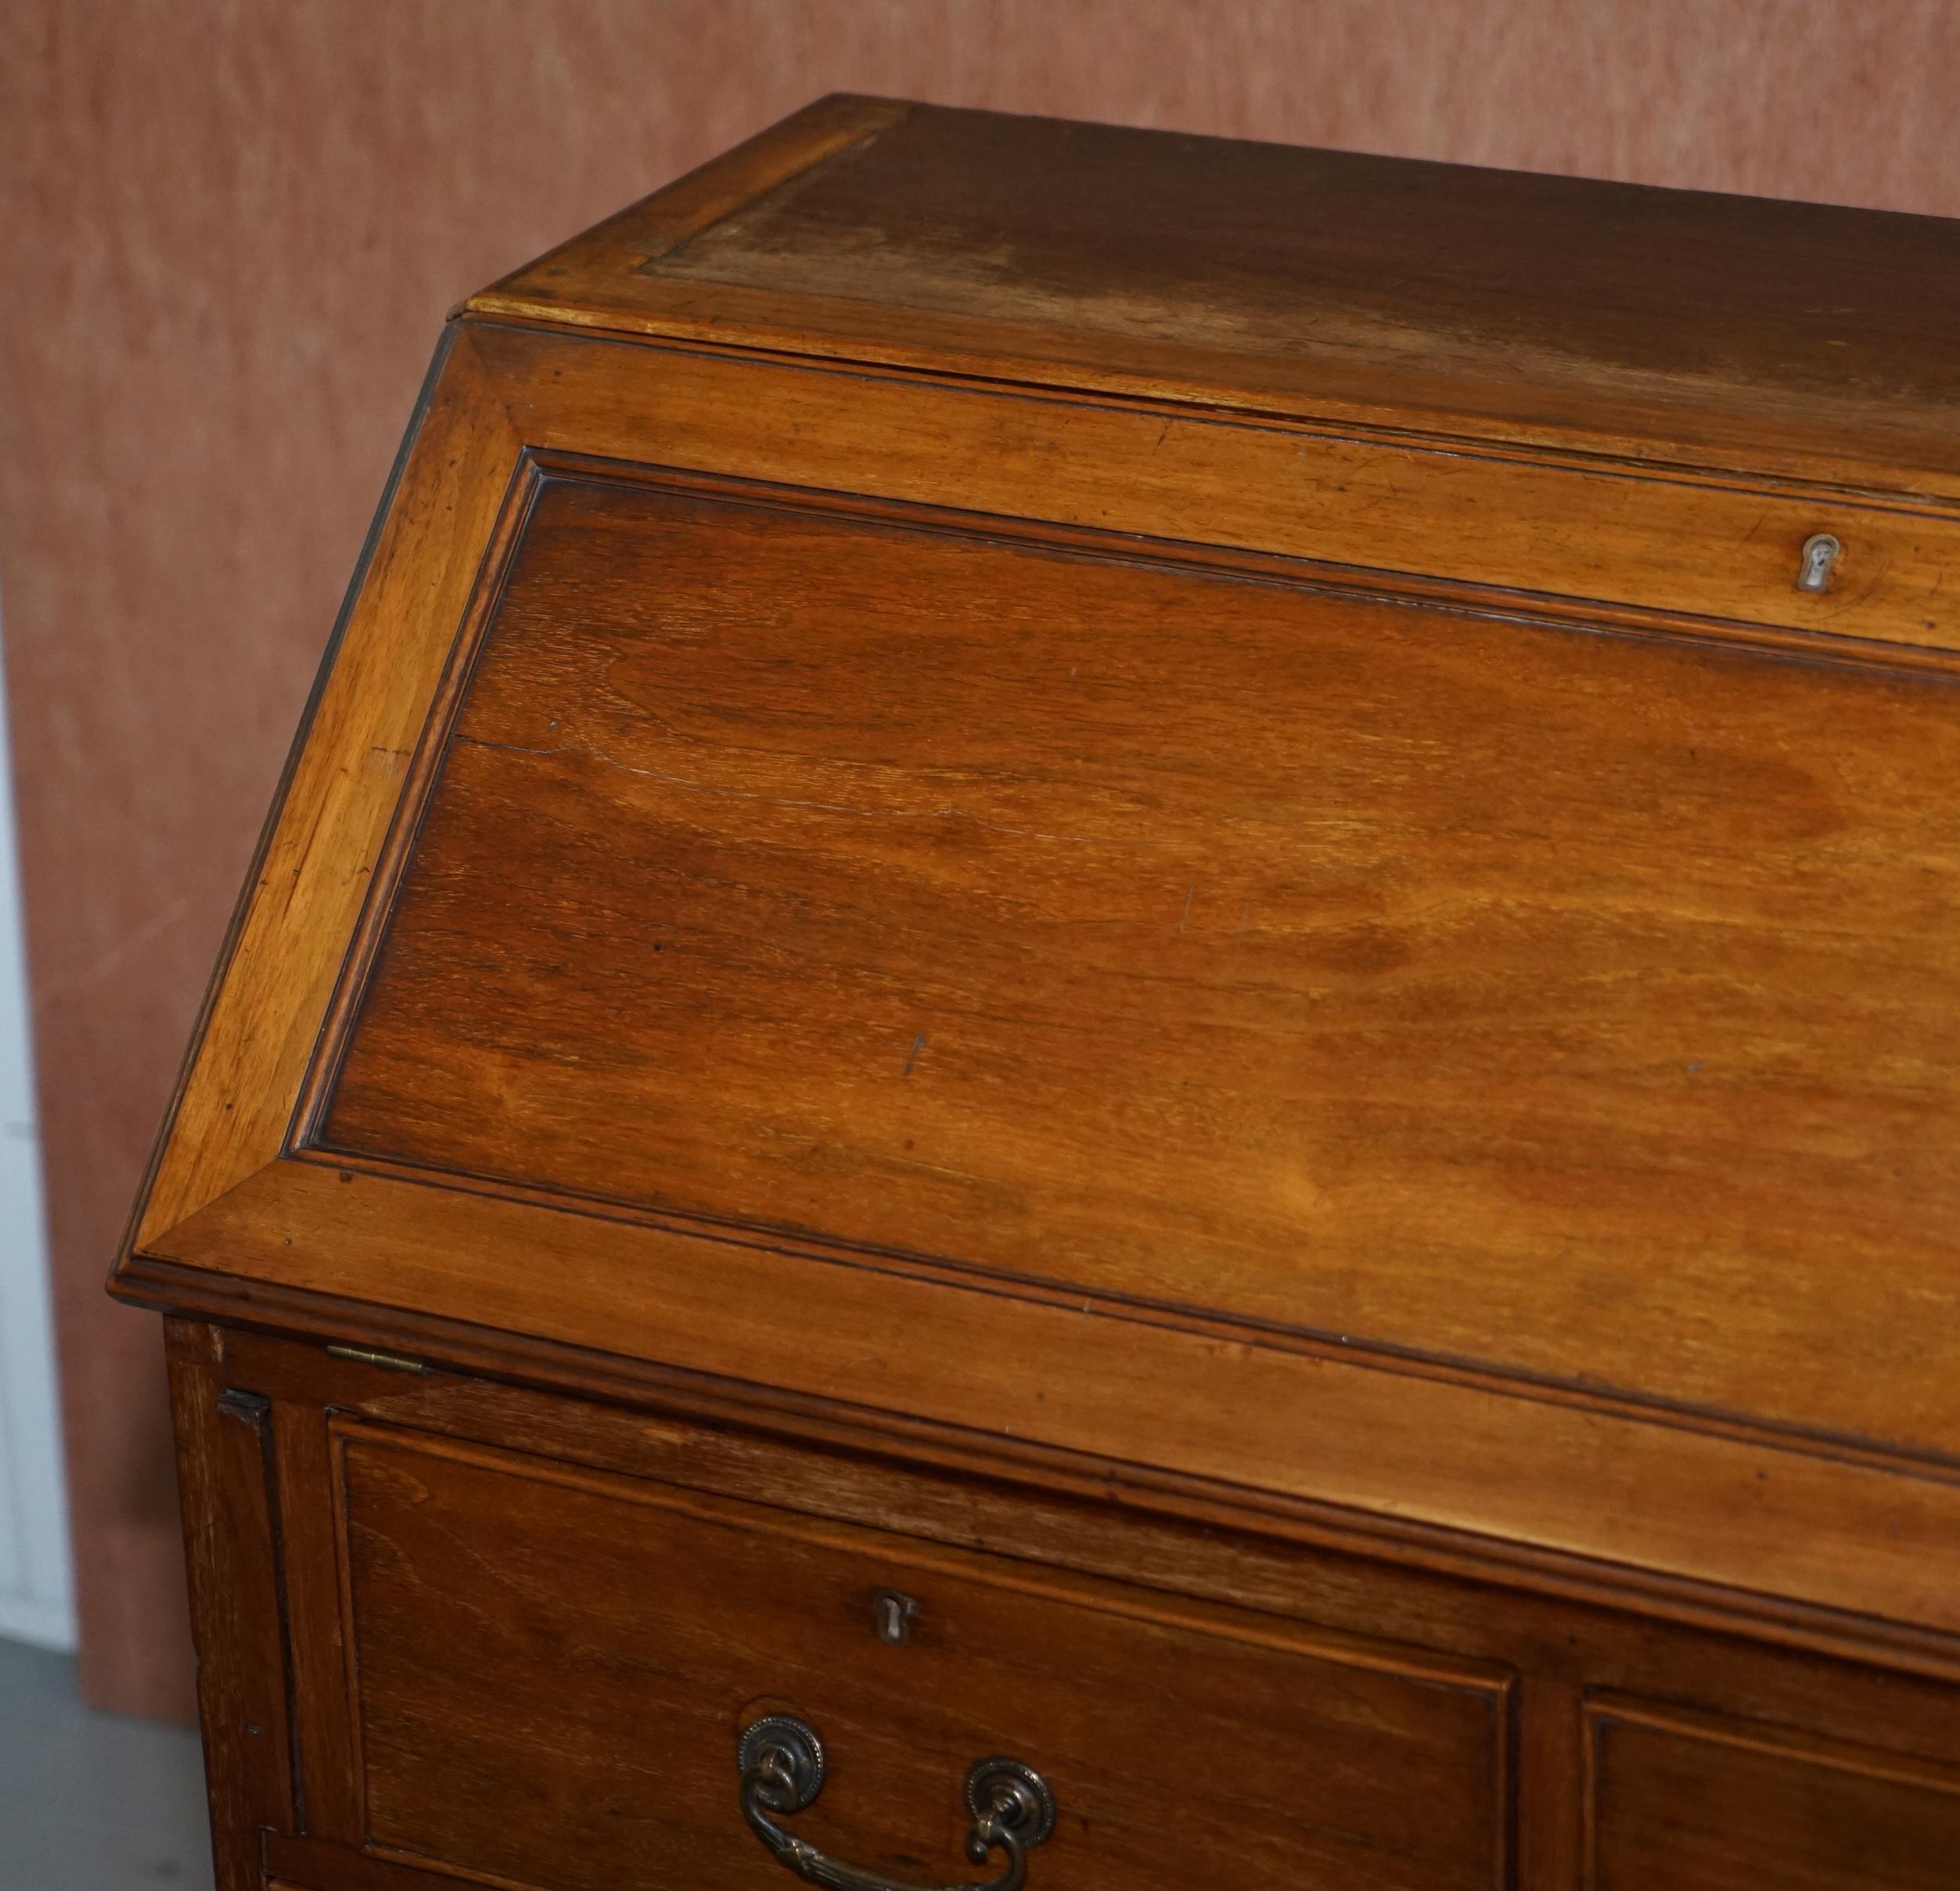 Early 20th Century Lovely circa 1900 Solid Walnut Writing Bureau Chest of Drawers with Desk Top